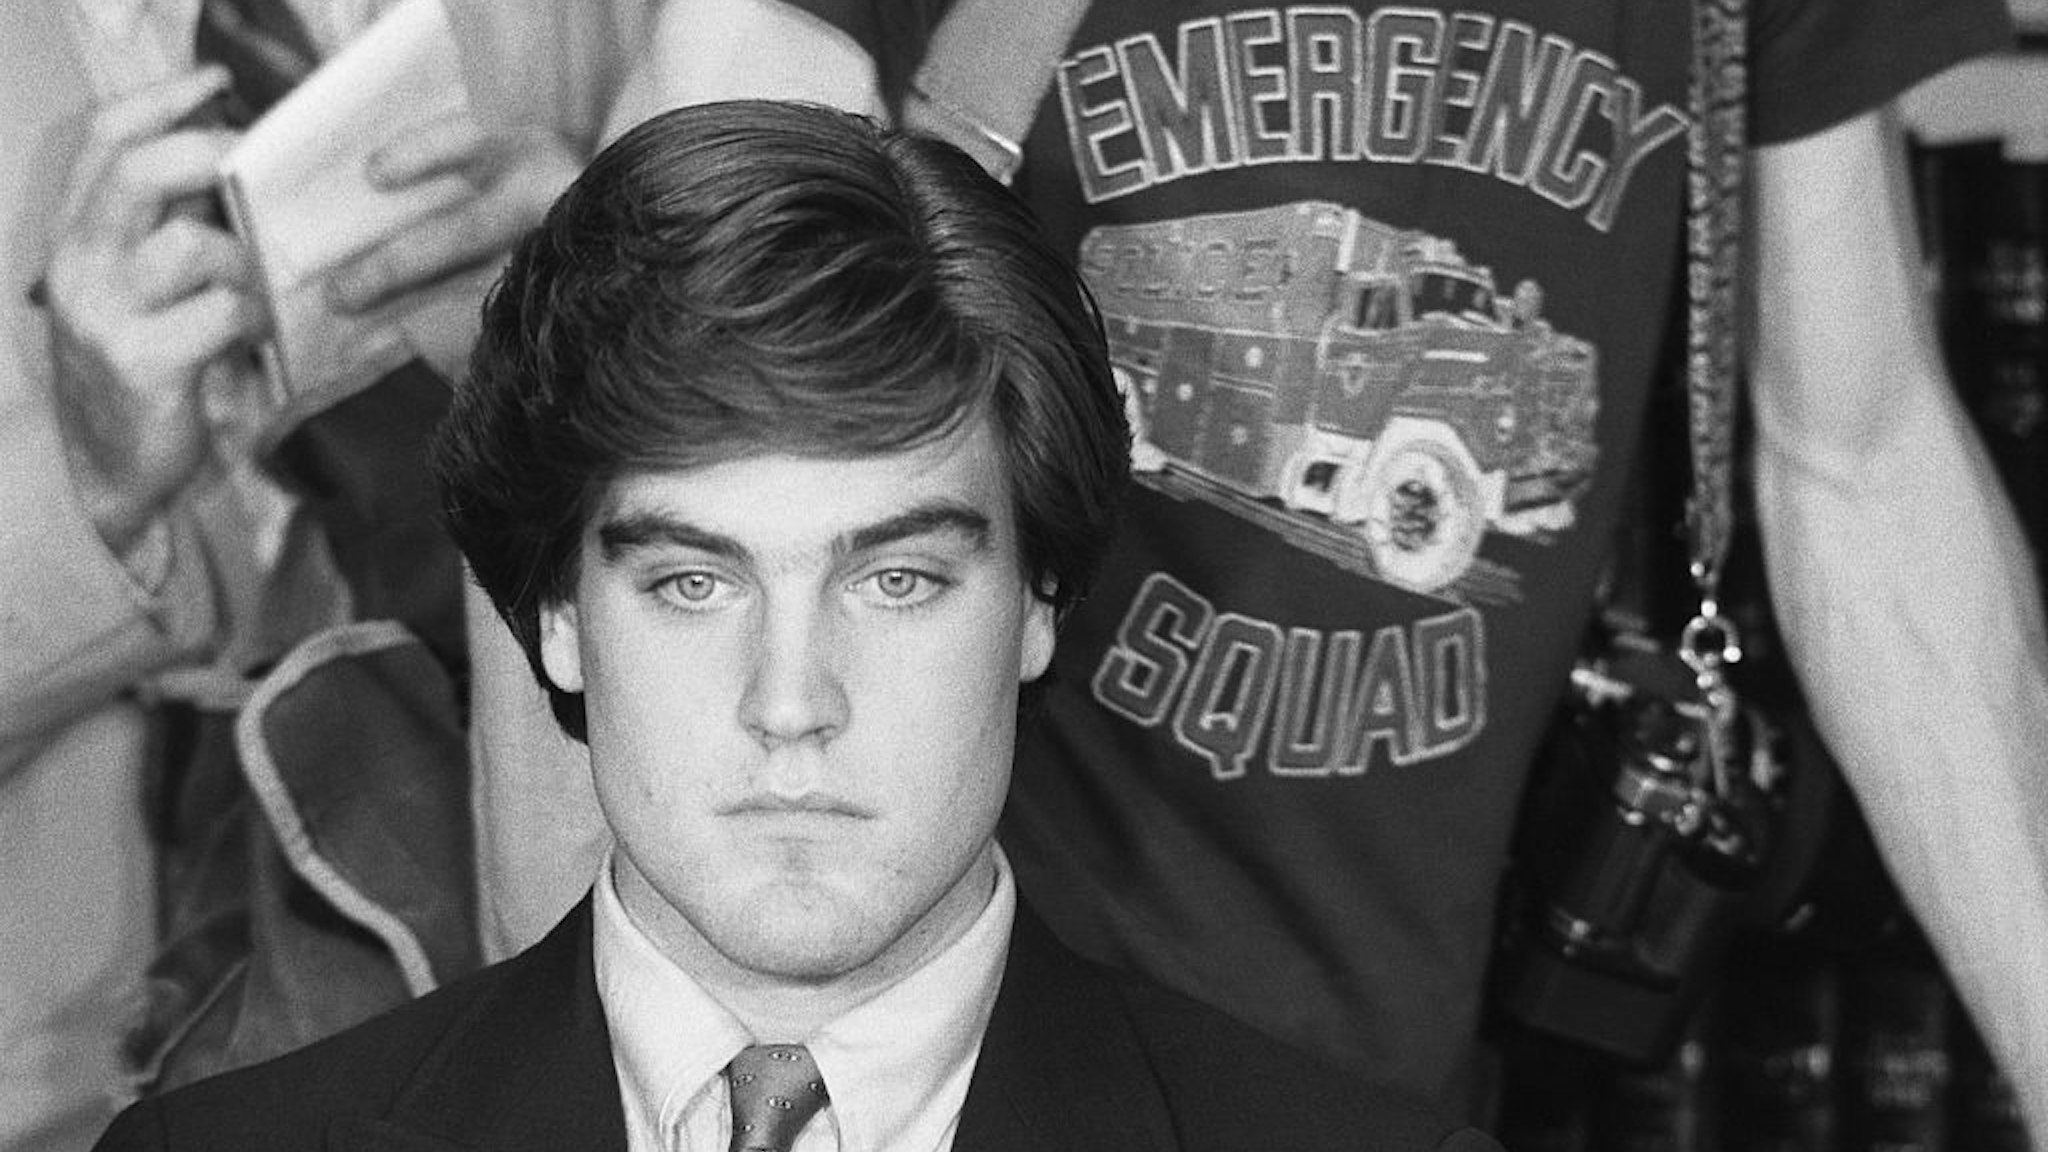 Robert Chambers, the accused in the so-called "Preppy Murder", eventually pleaded guilty to first-degree manslaughter. He insisted that he had unintentionally strangled Levin during rough sex while in Central Park, where her body was found. Here he faces reporters after being released from the Riker's Island jail on $150,000 bond. 1986.